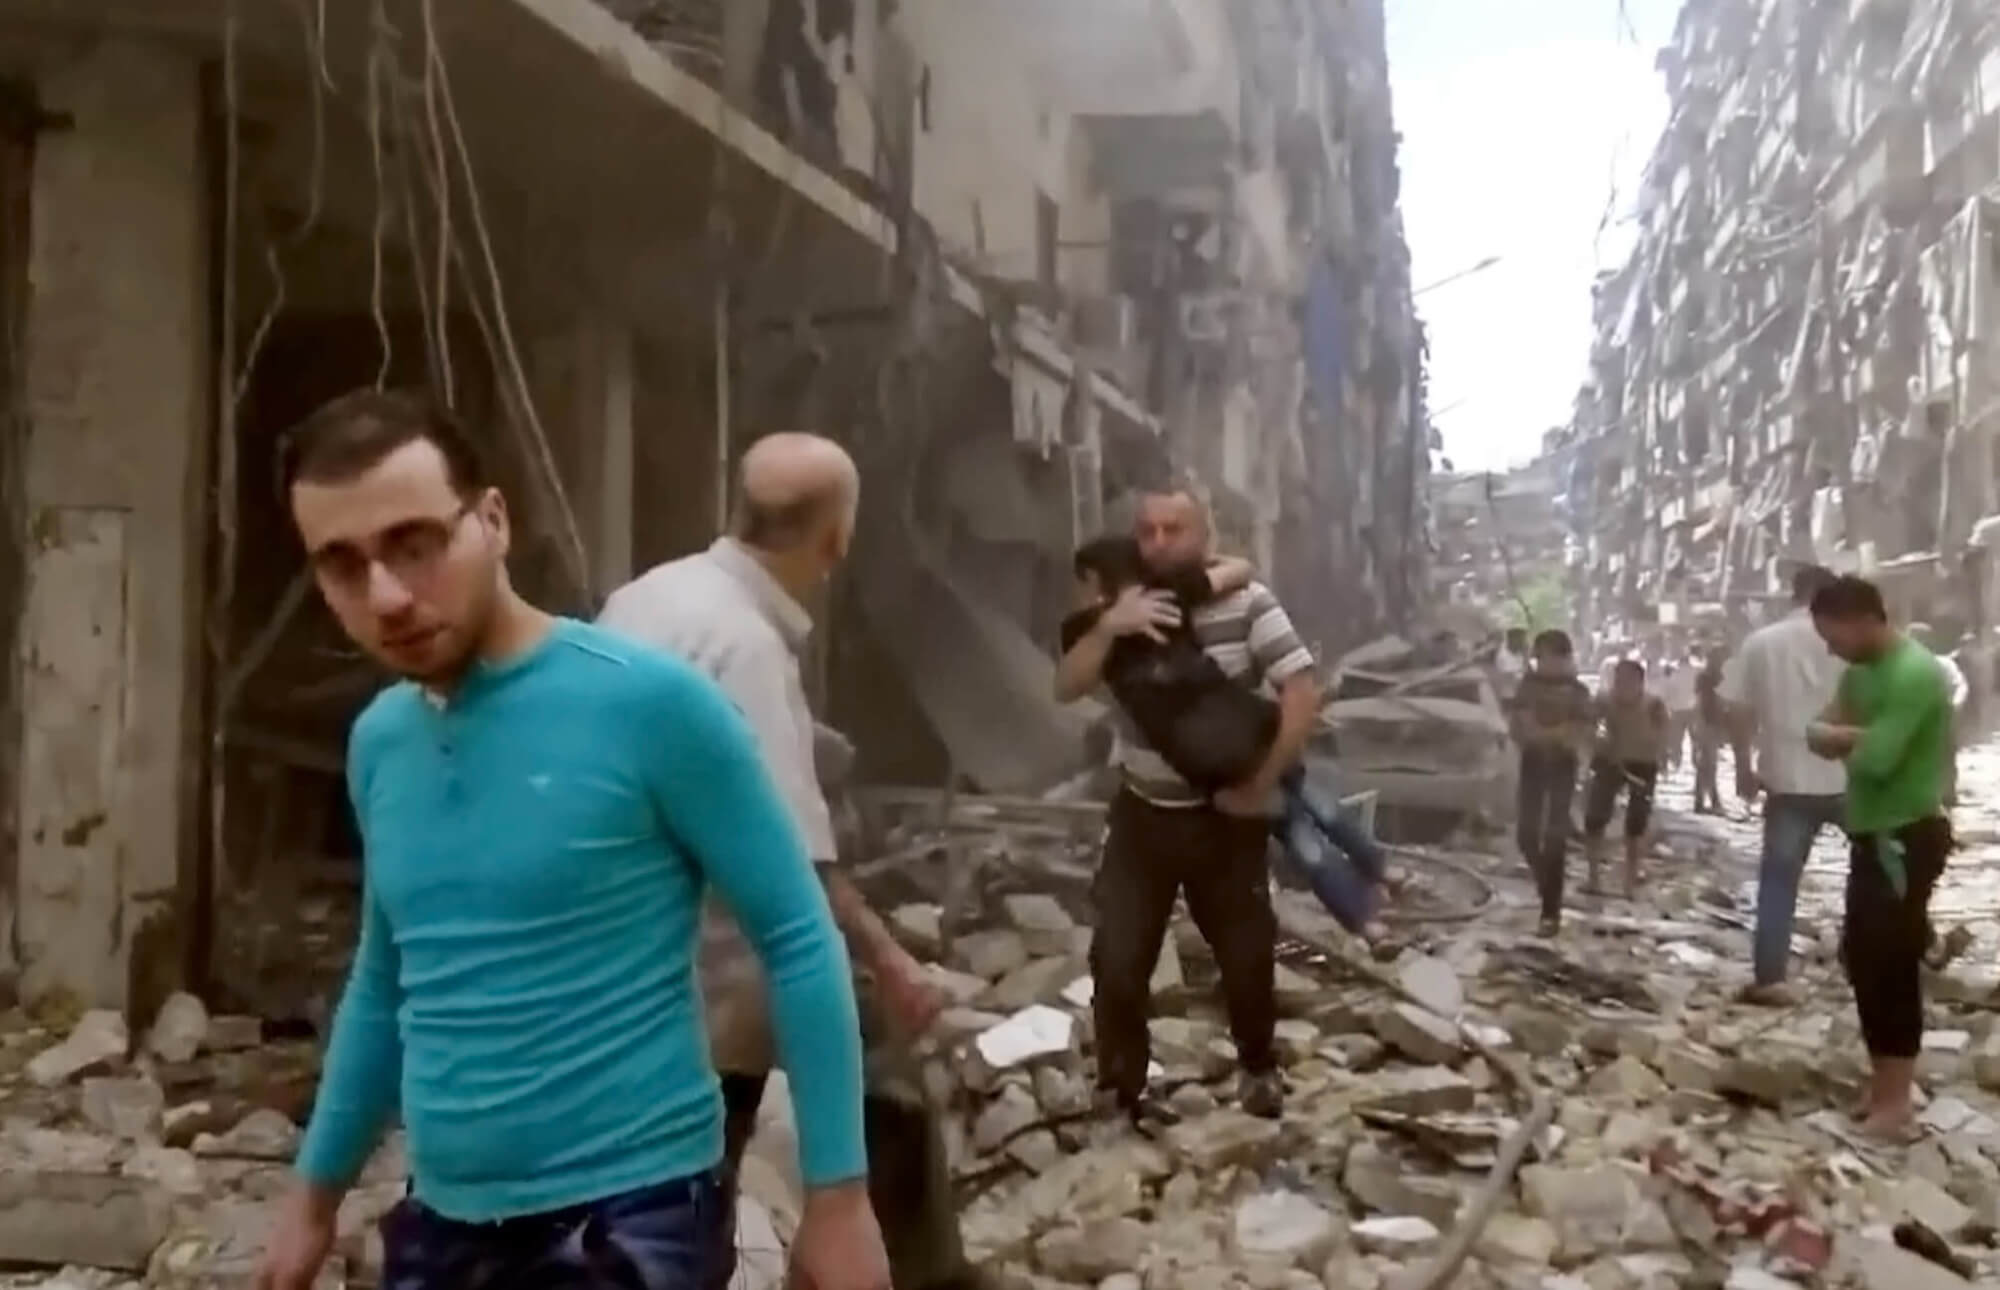 surviors walk through rubble and debris from airstrike in Syria